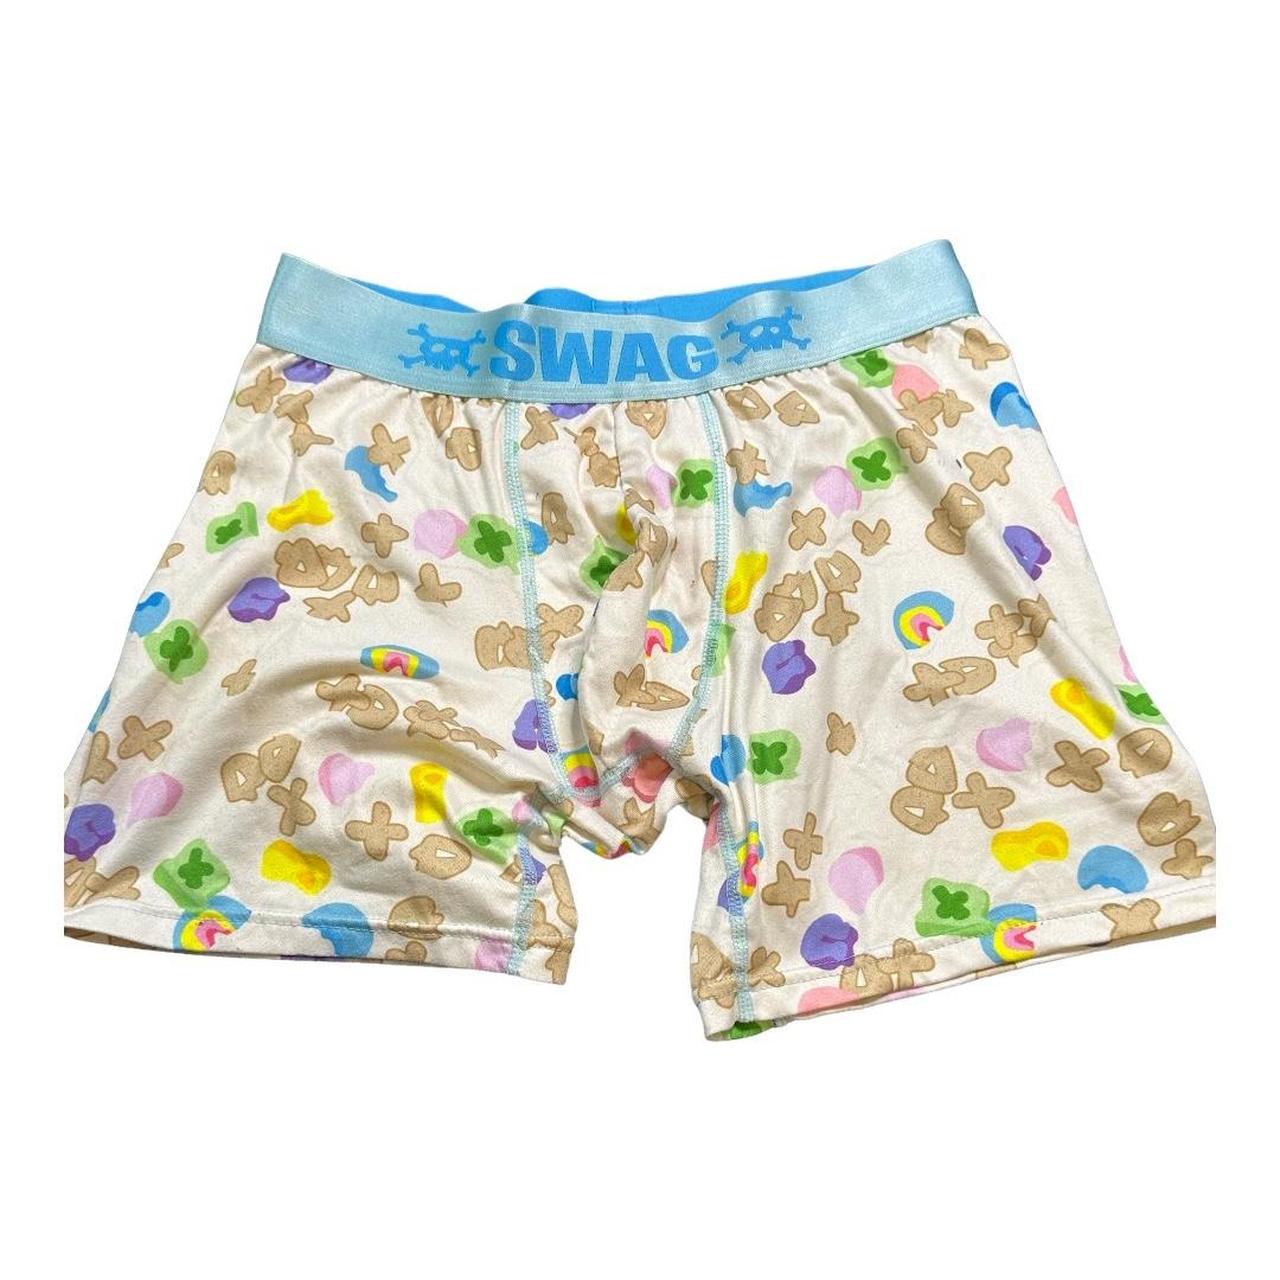 Luck charms in milk swag boxers worn as shorts - Depop